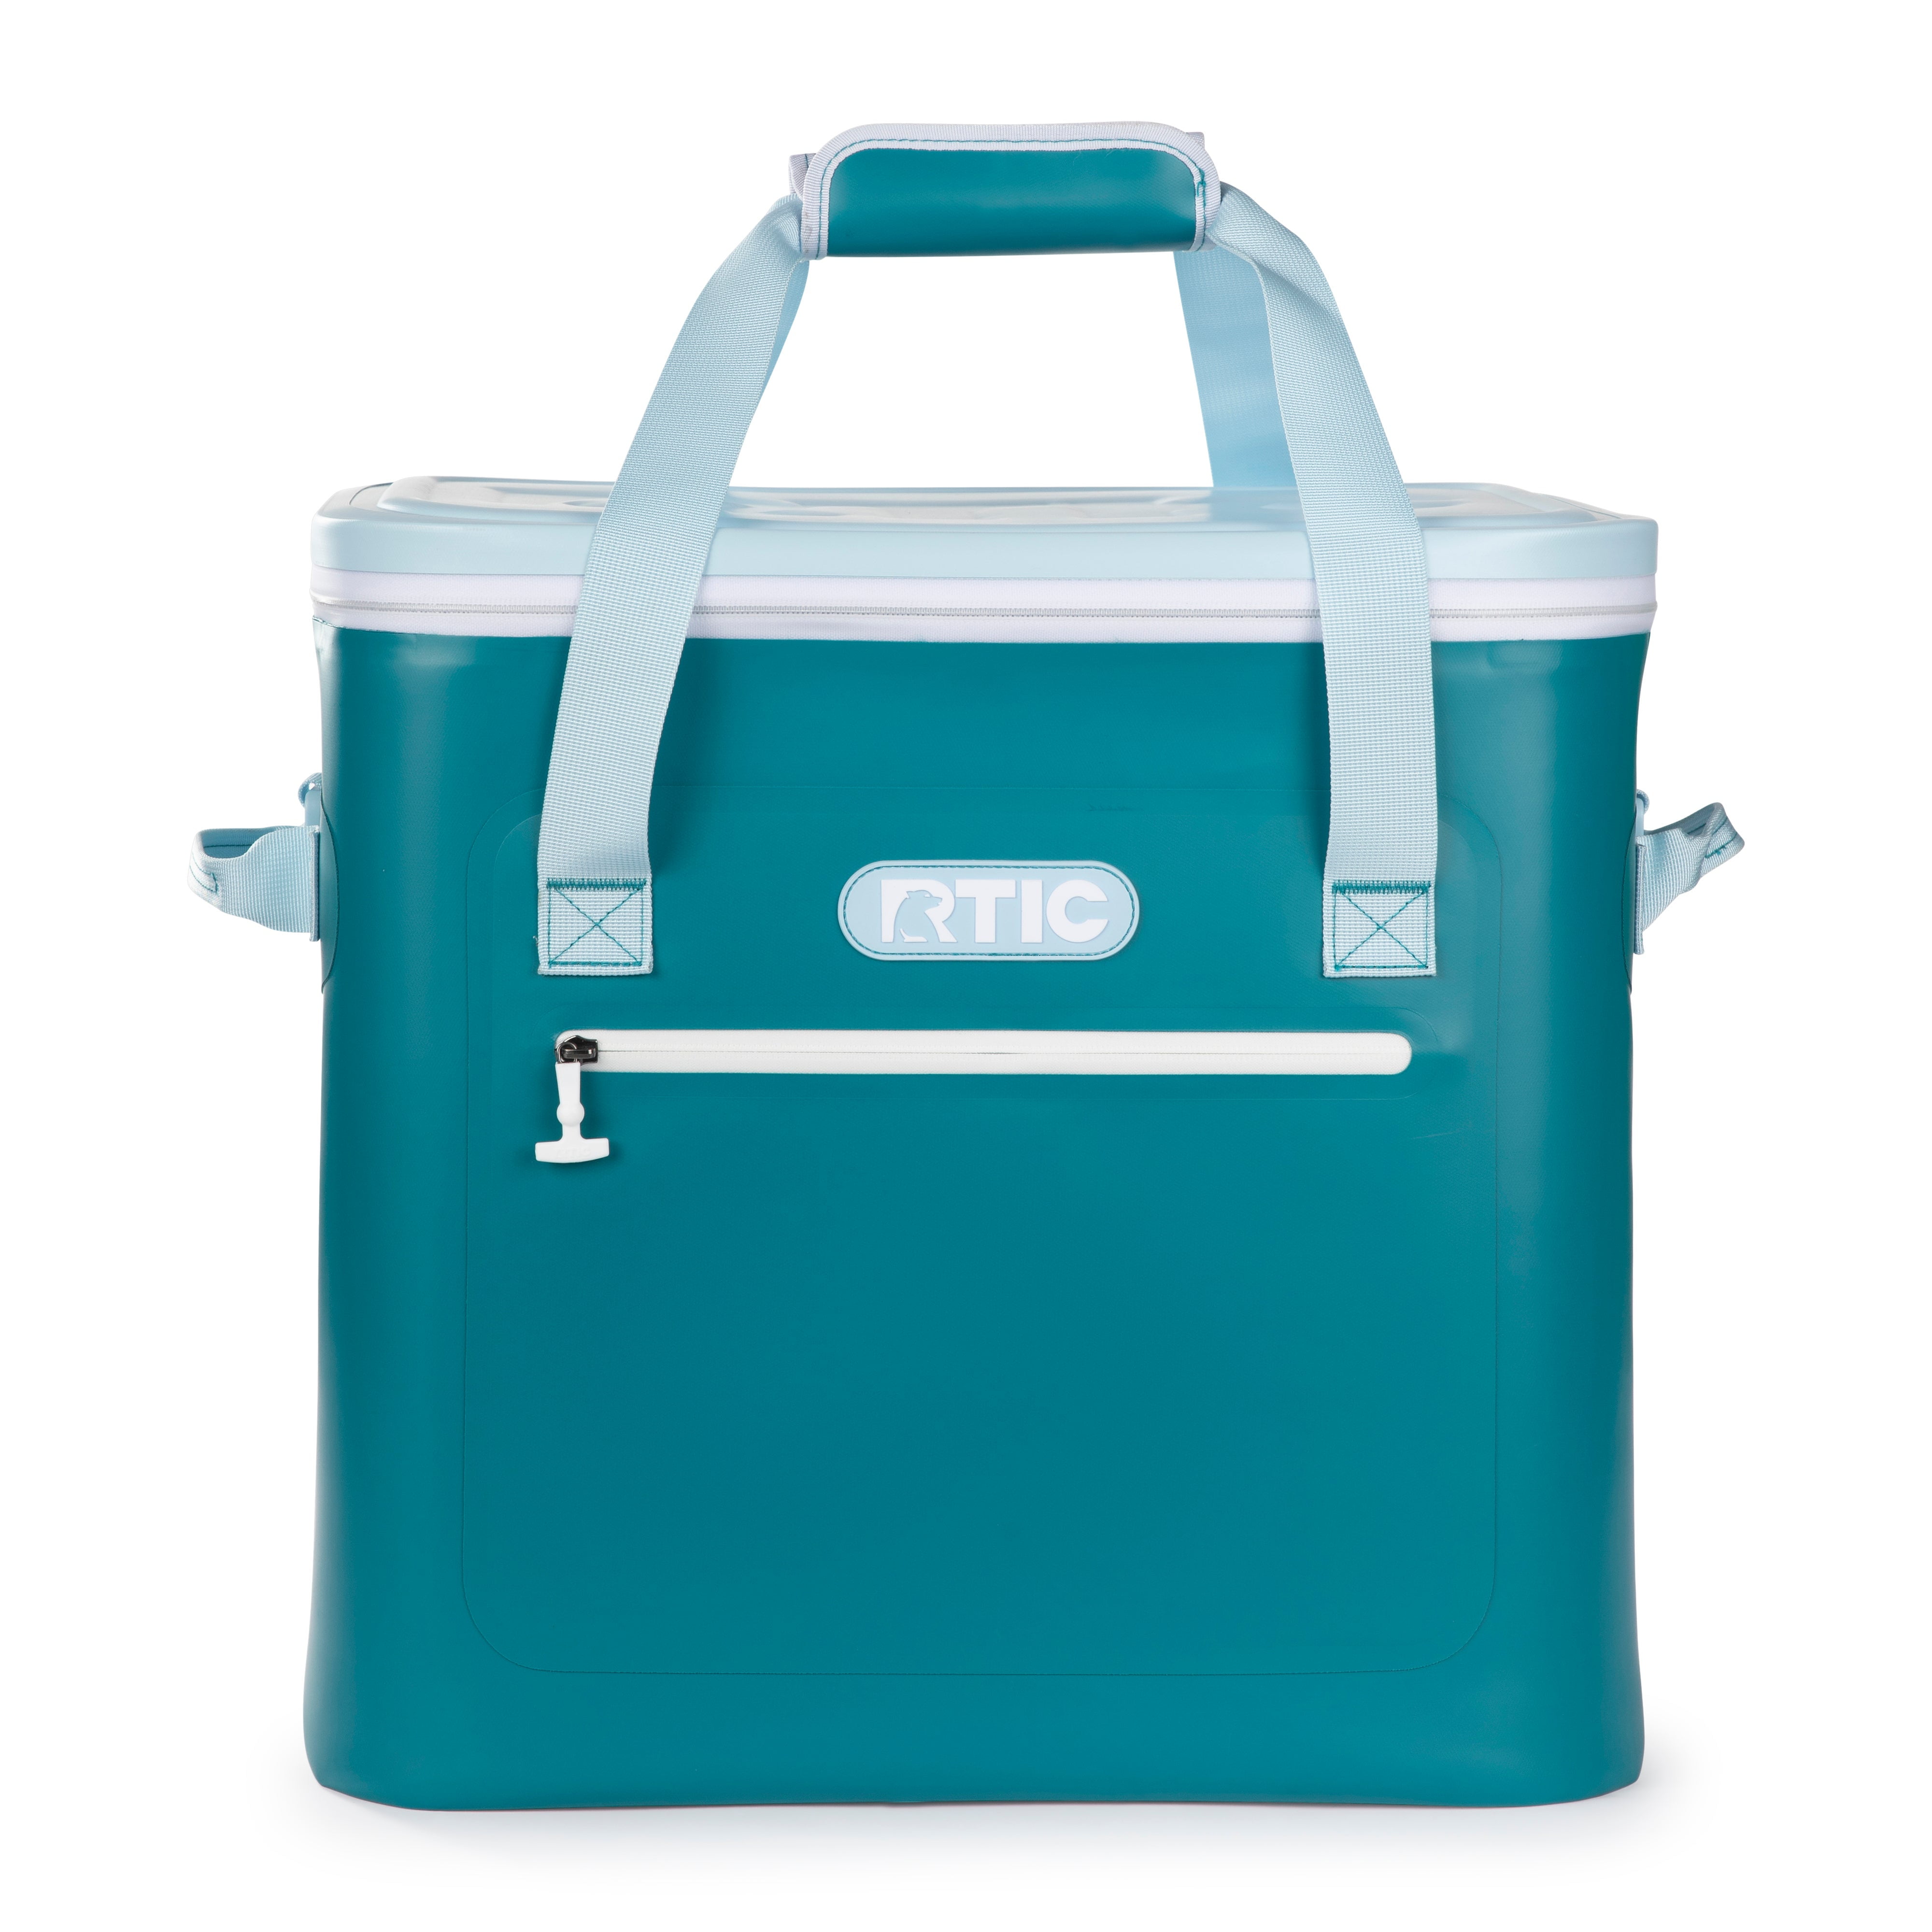 RTIC Soft Cooler 40 Can, Insulated Bag Portable Ice Chest Box for Lunch,  Beach, Drink, Beverage, Travel, Camping, Picnic, Car, Trips, Floating  Cooler